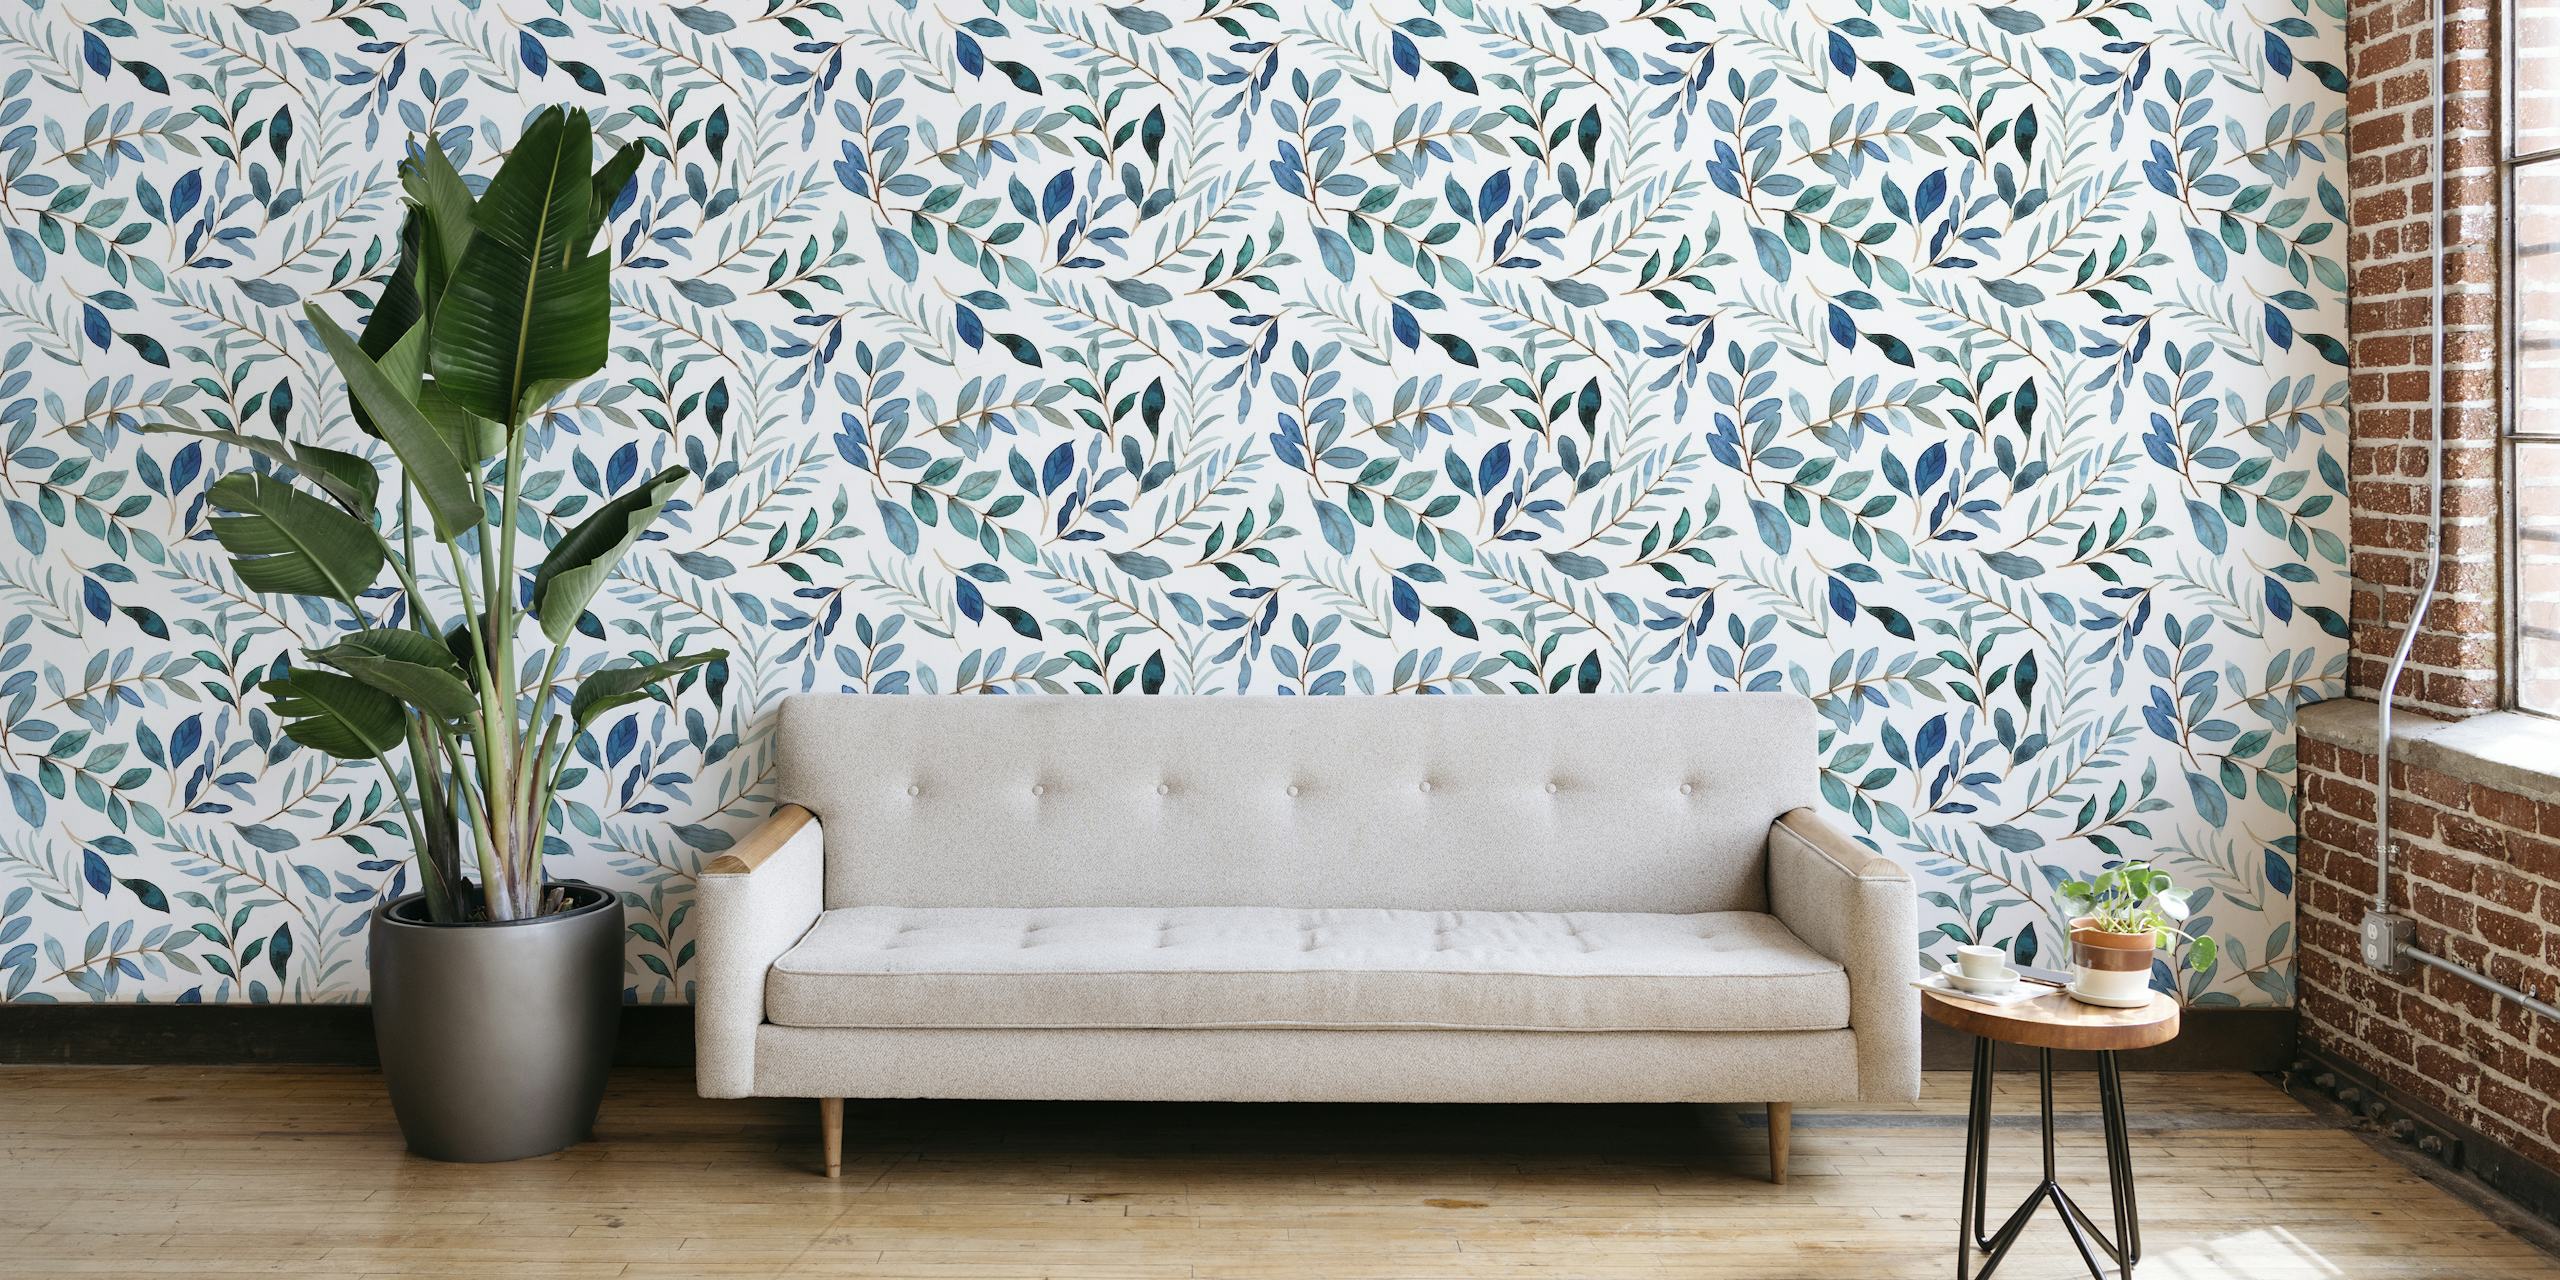 Botanical Pattern 4 wall mural with soothing green and blue plant design